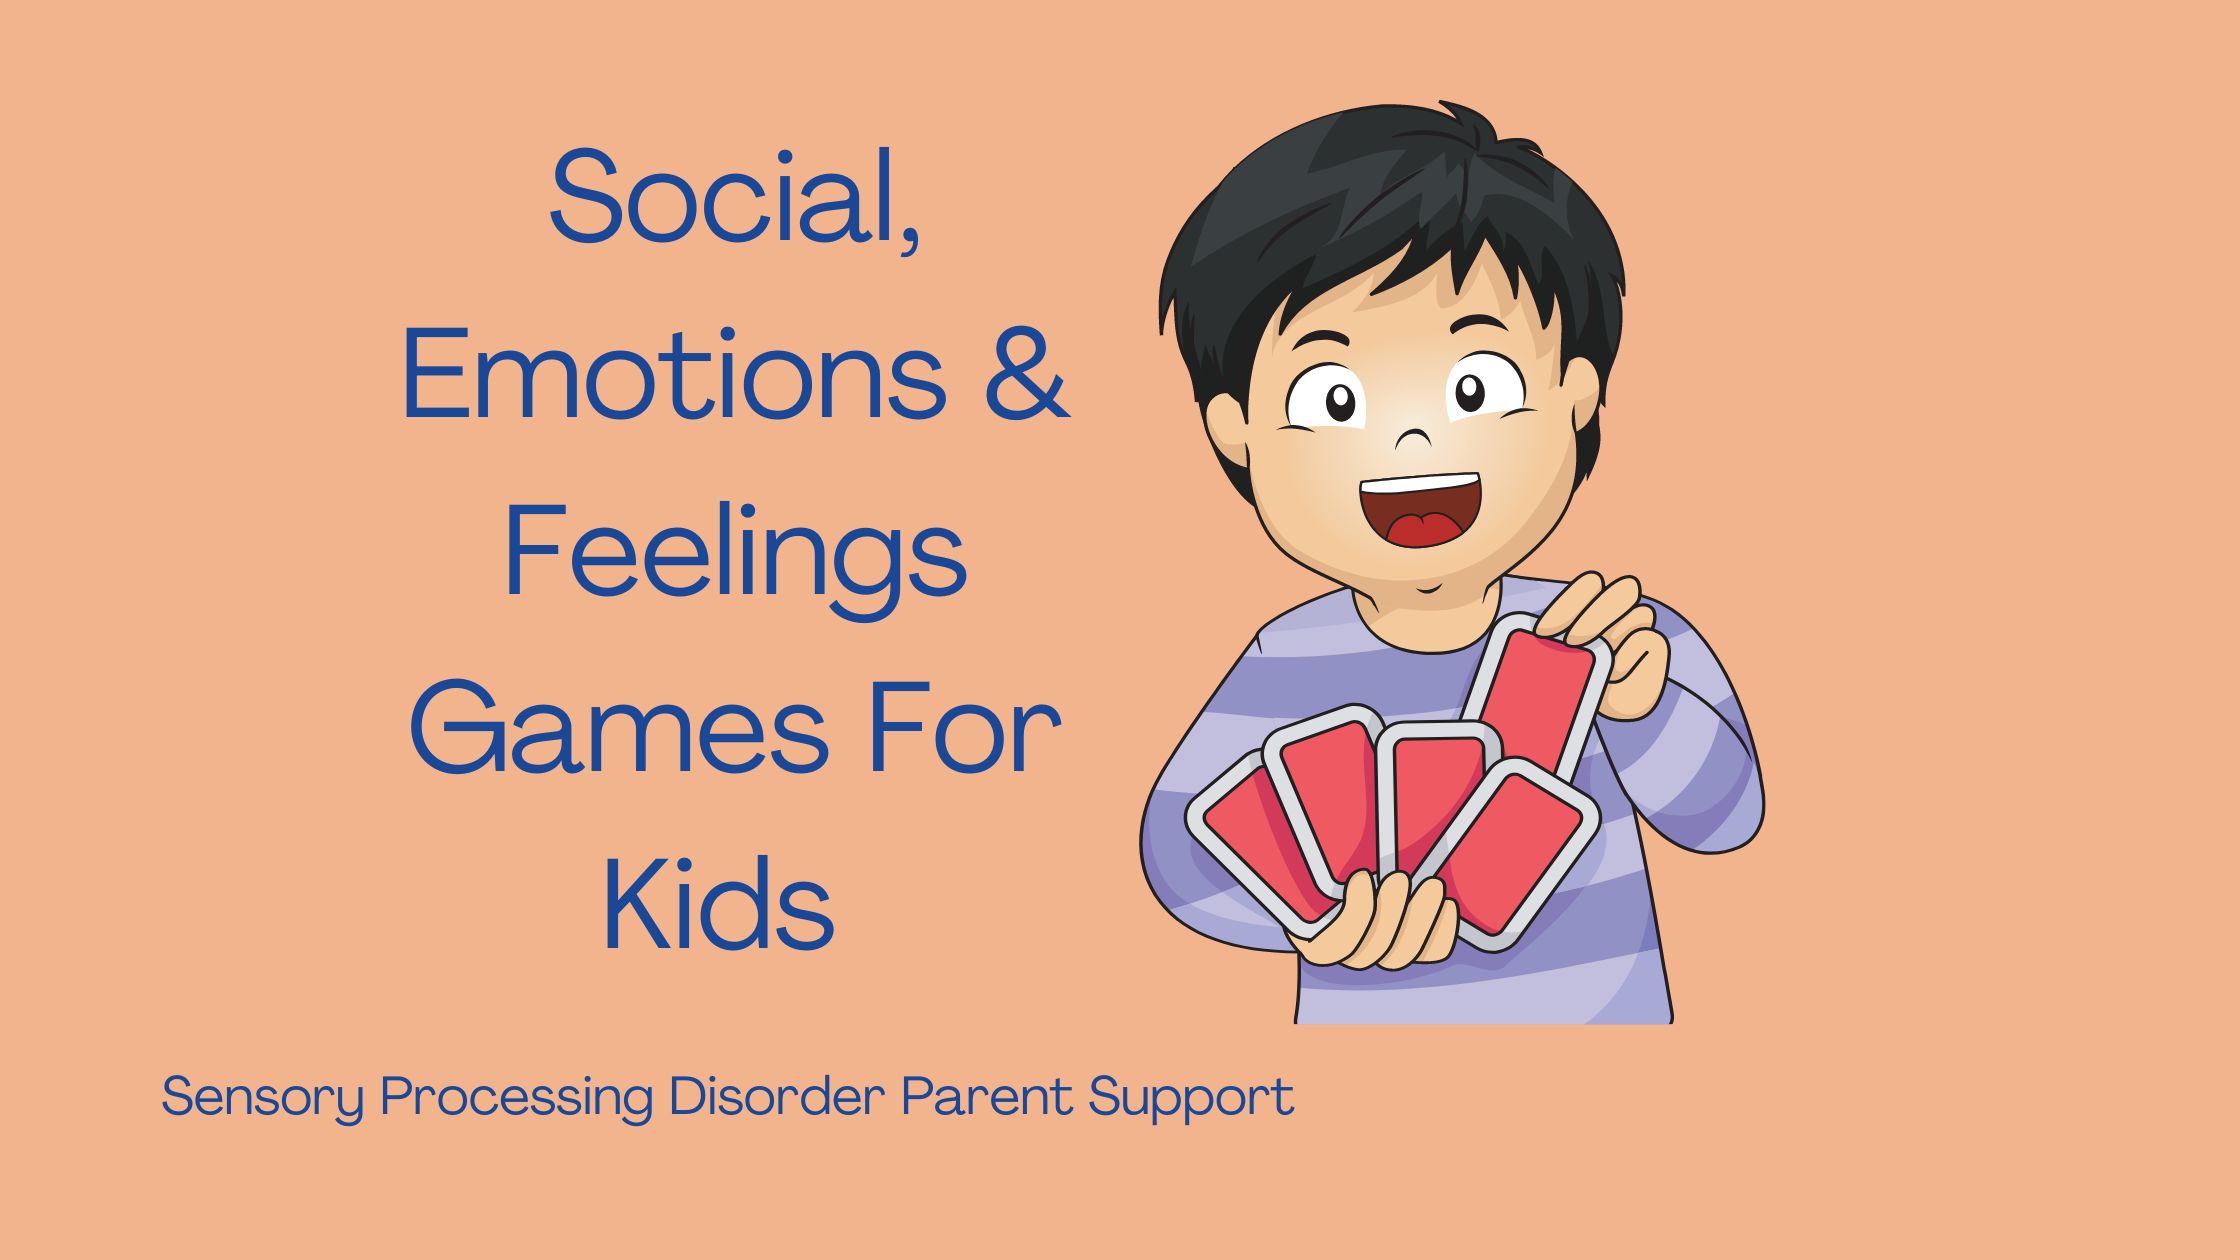 child with sensory processing disorder playing a feelings card game Social, Emotions & Feelings Games For Kids